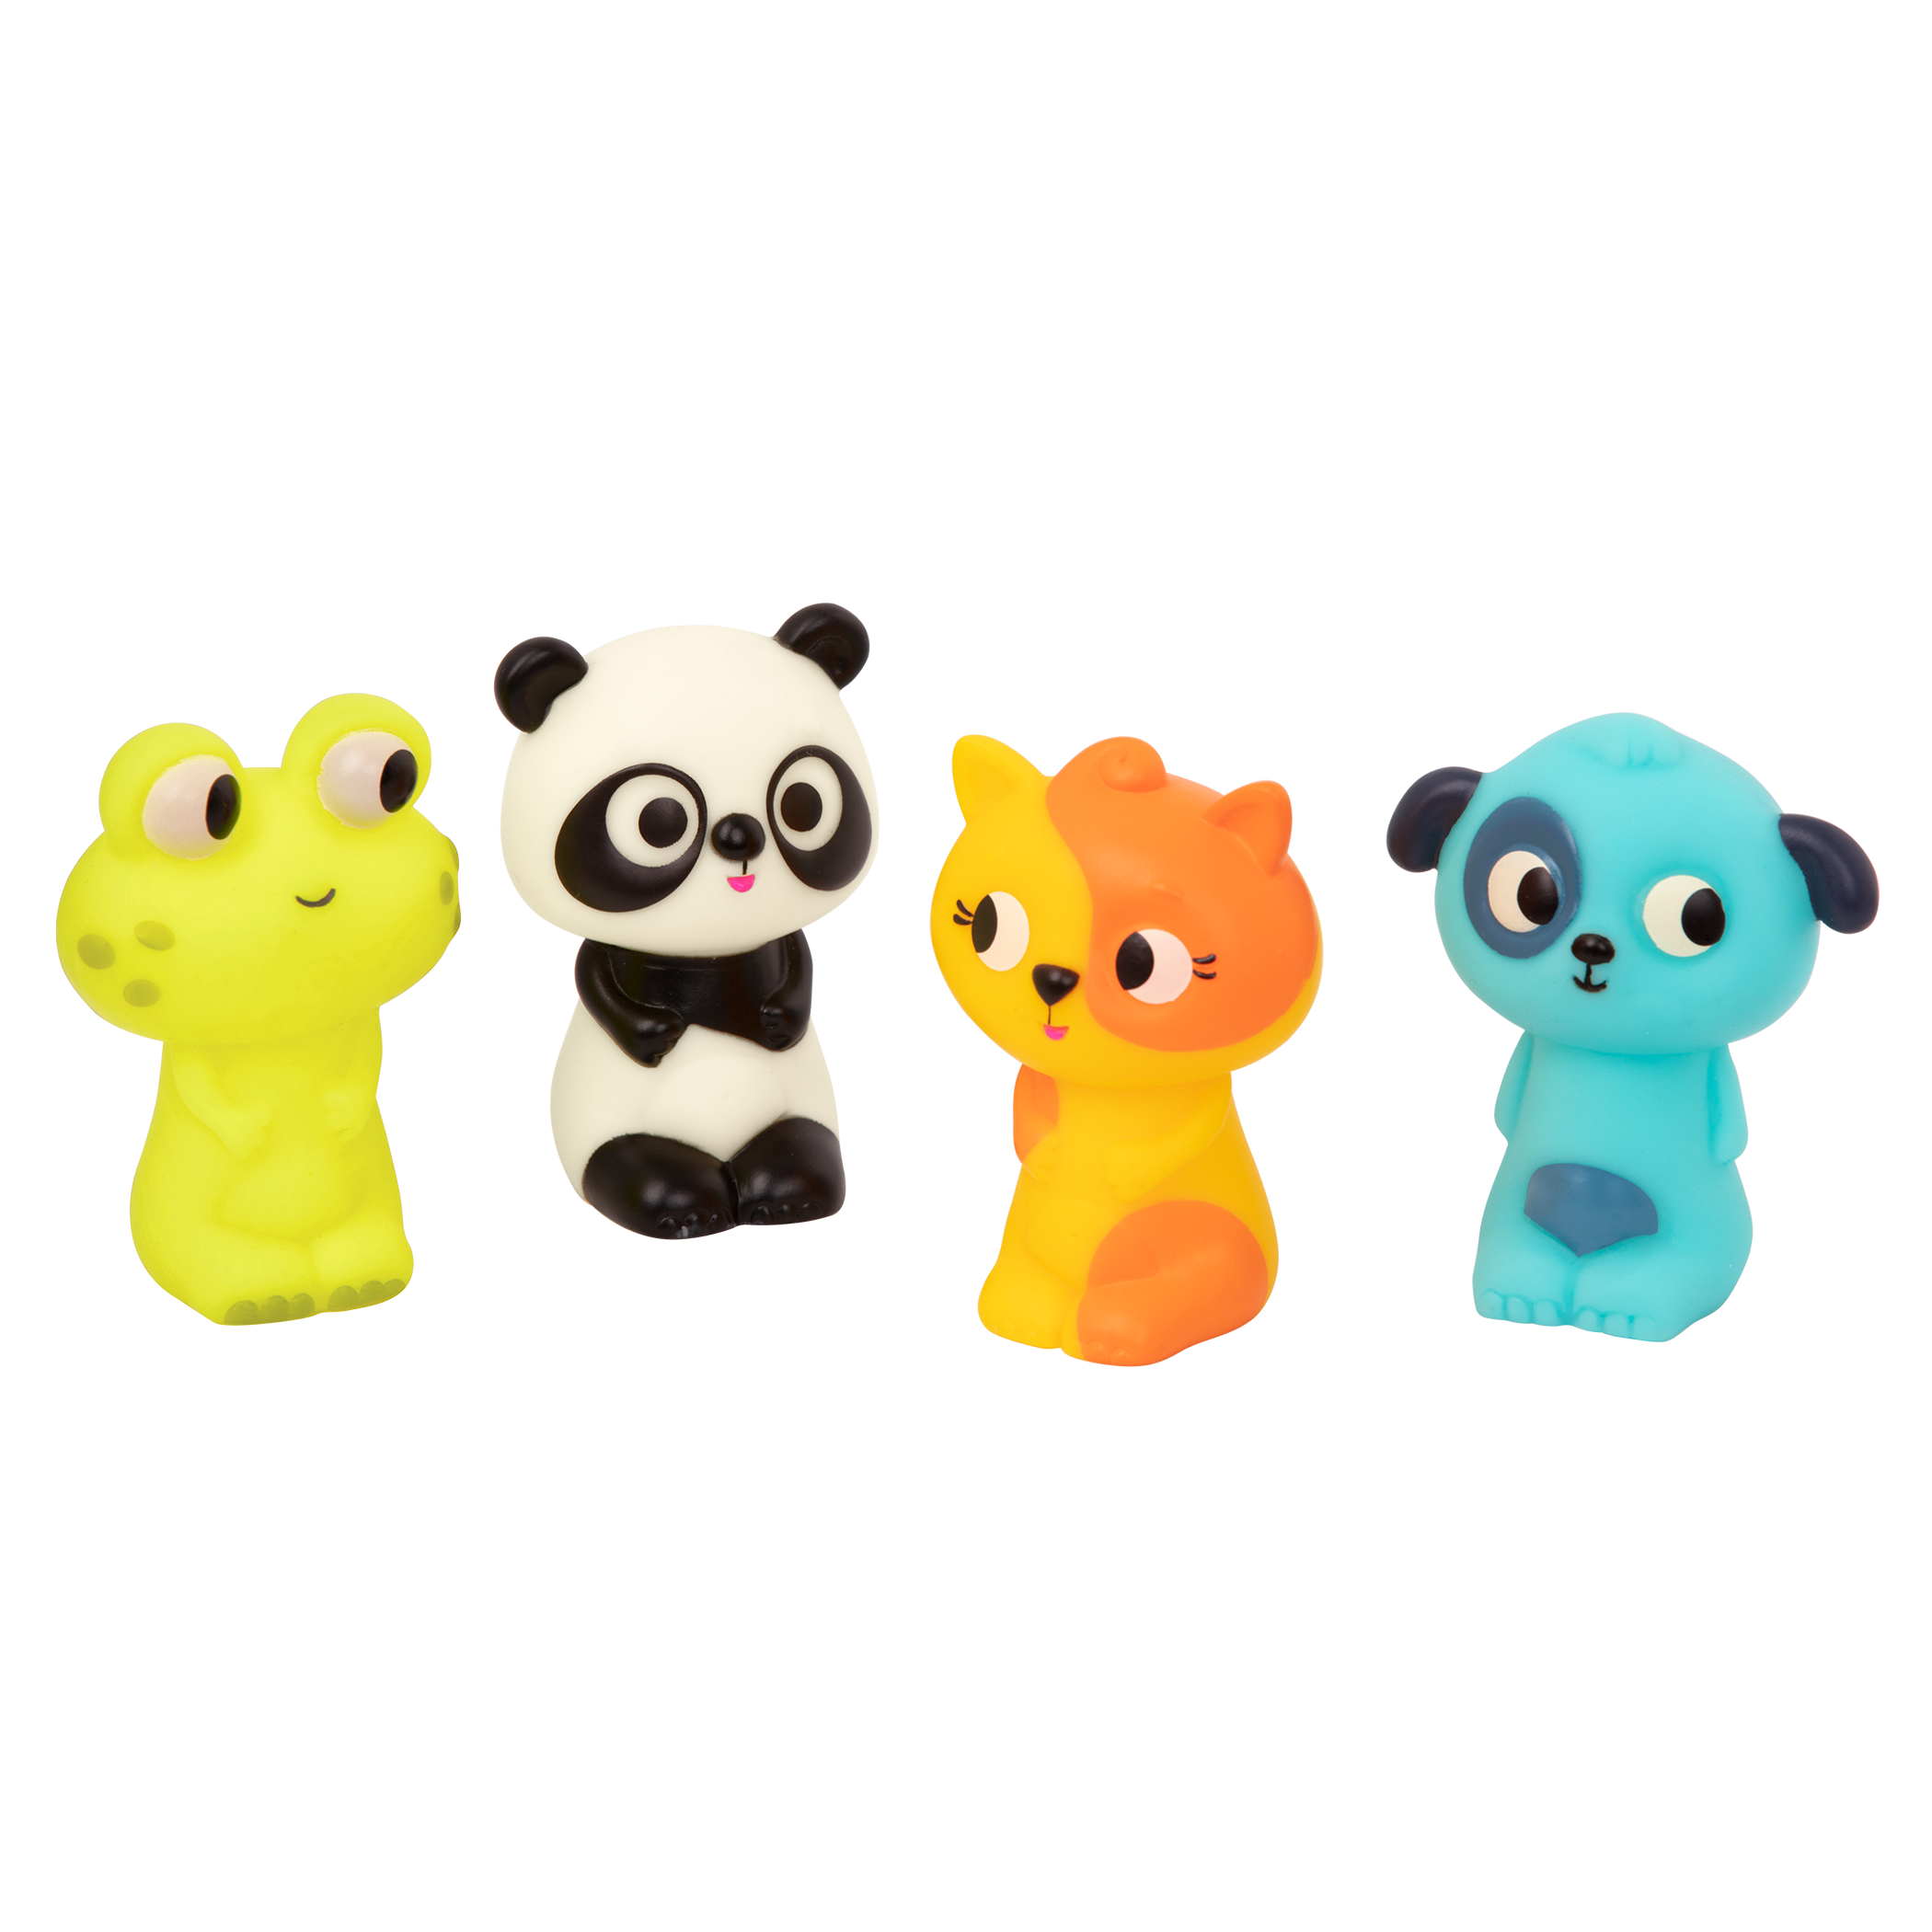 Pinky Pals - Dash, Coco, Sunny, Rico, Finger Puppets